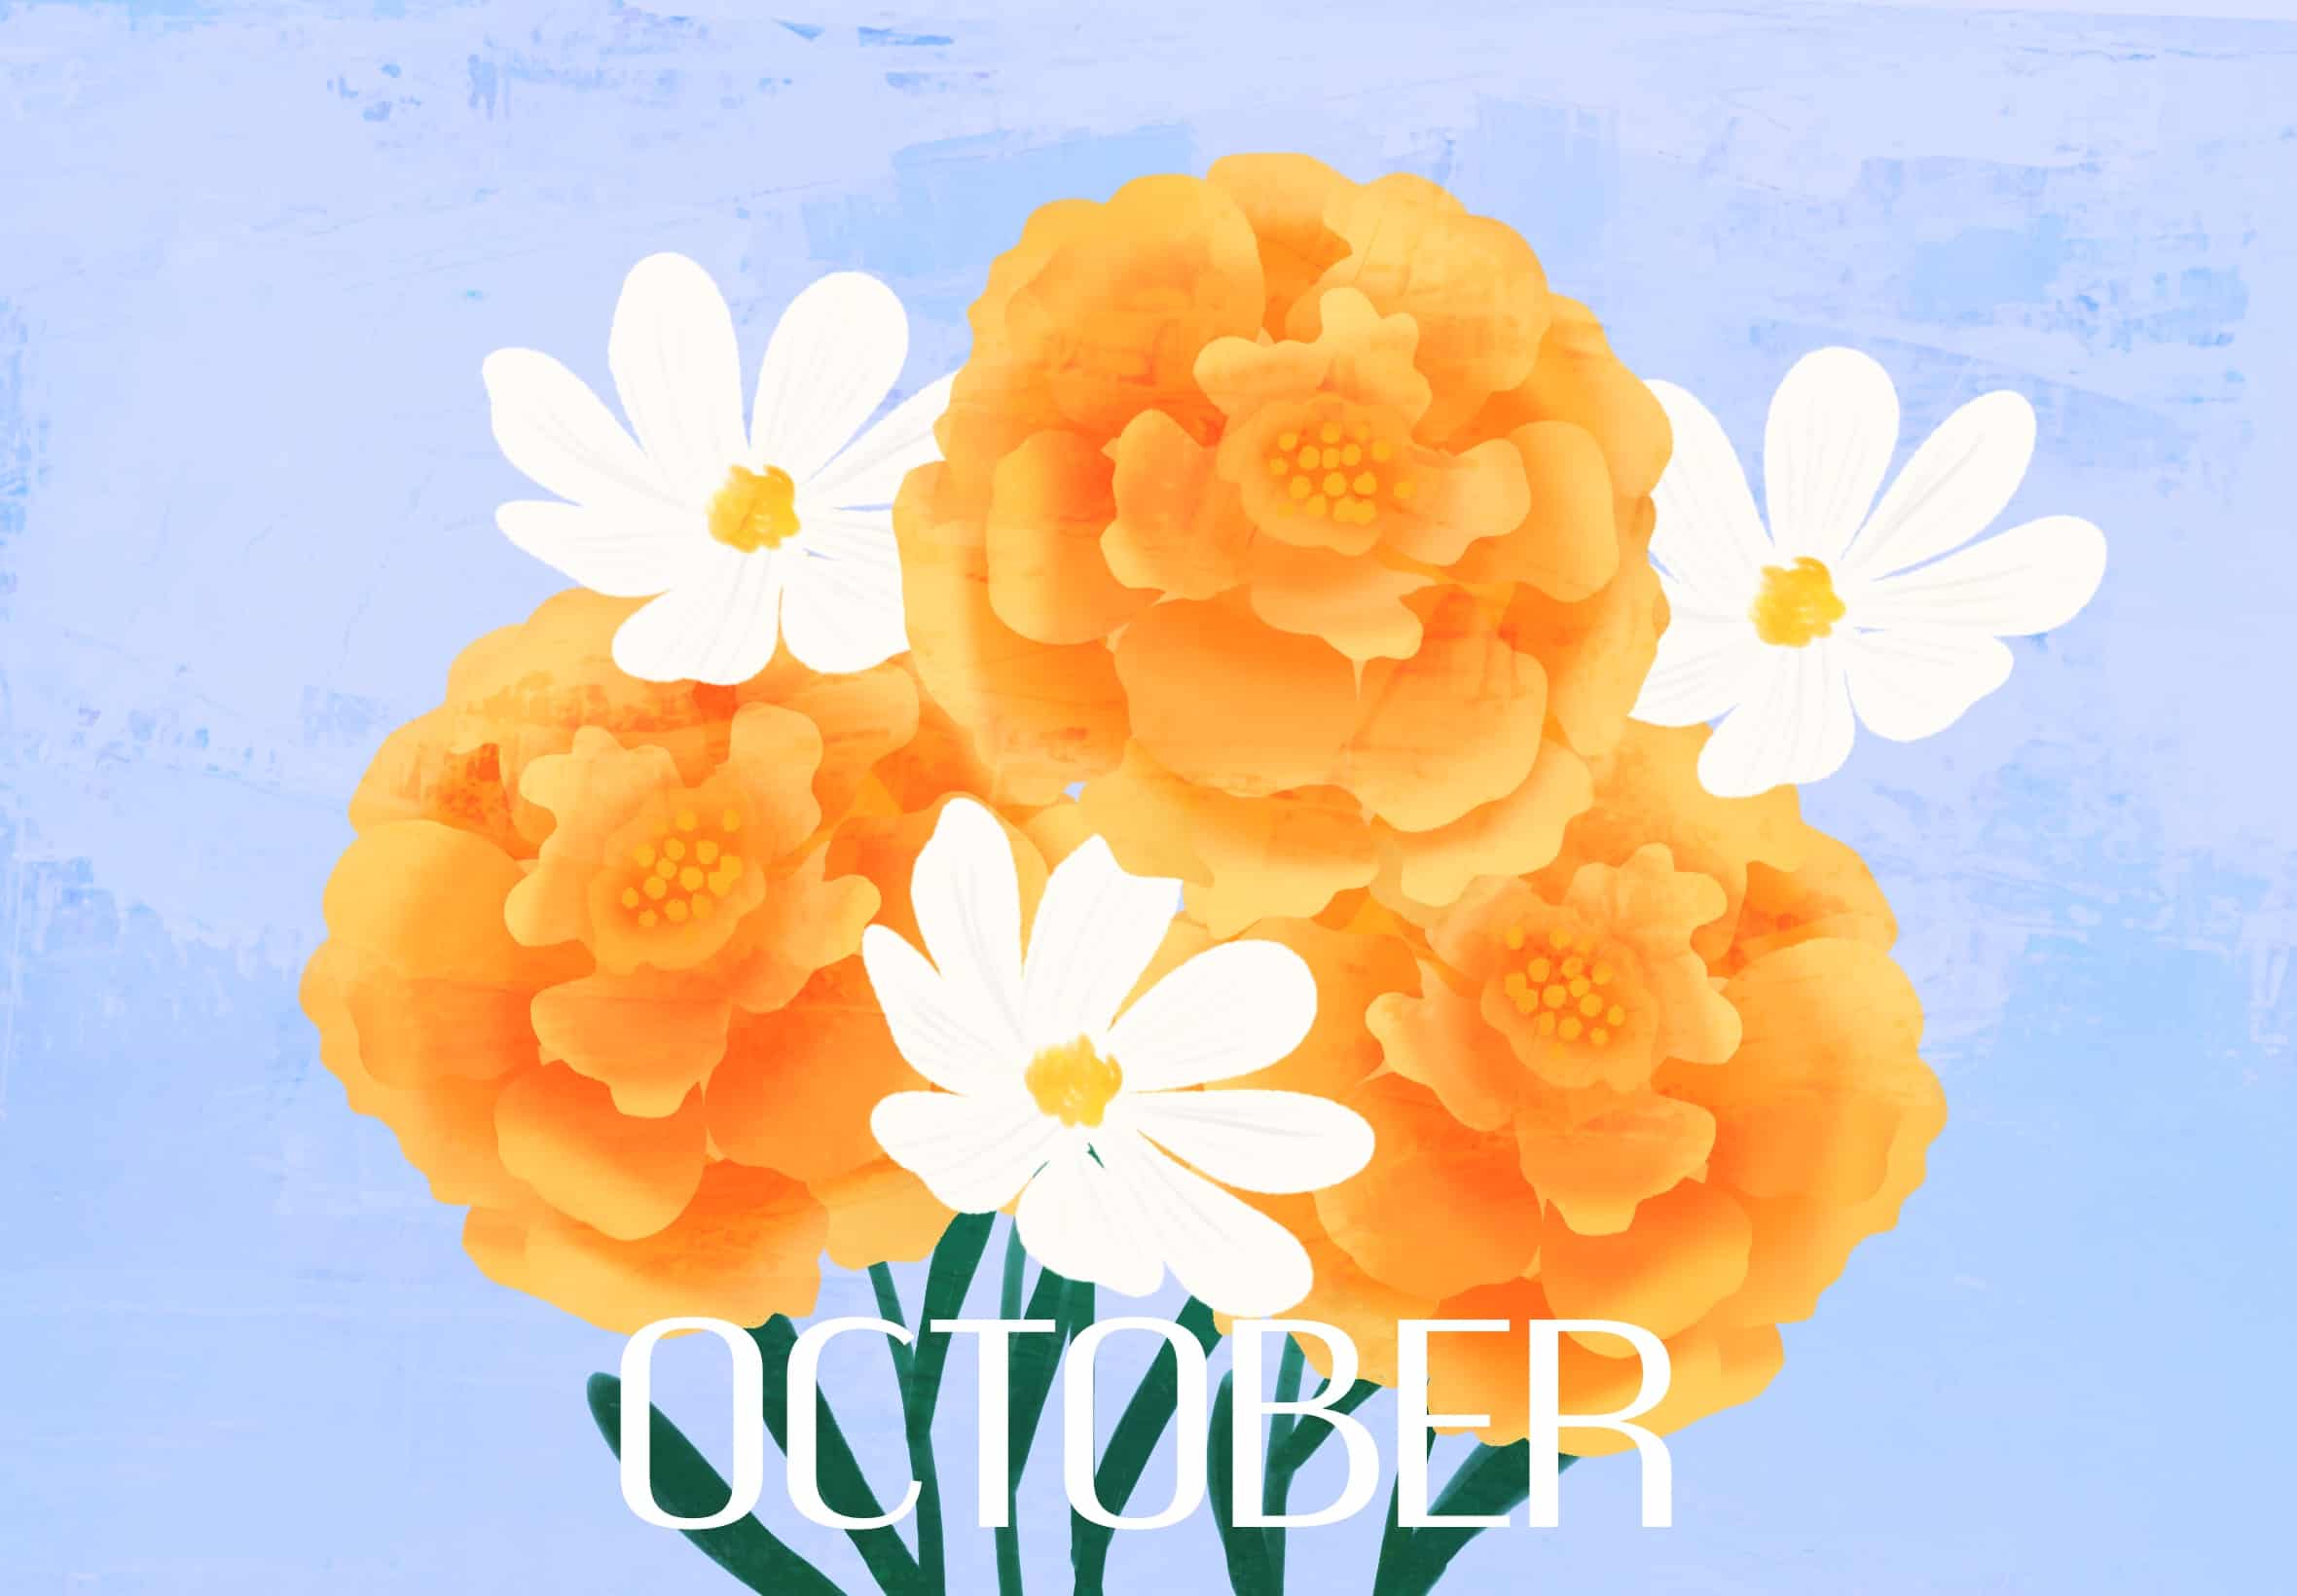 October Birth Month Flowers - Marigold and Cosmos